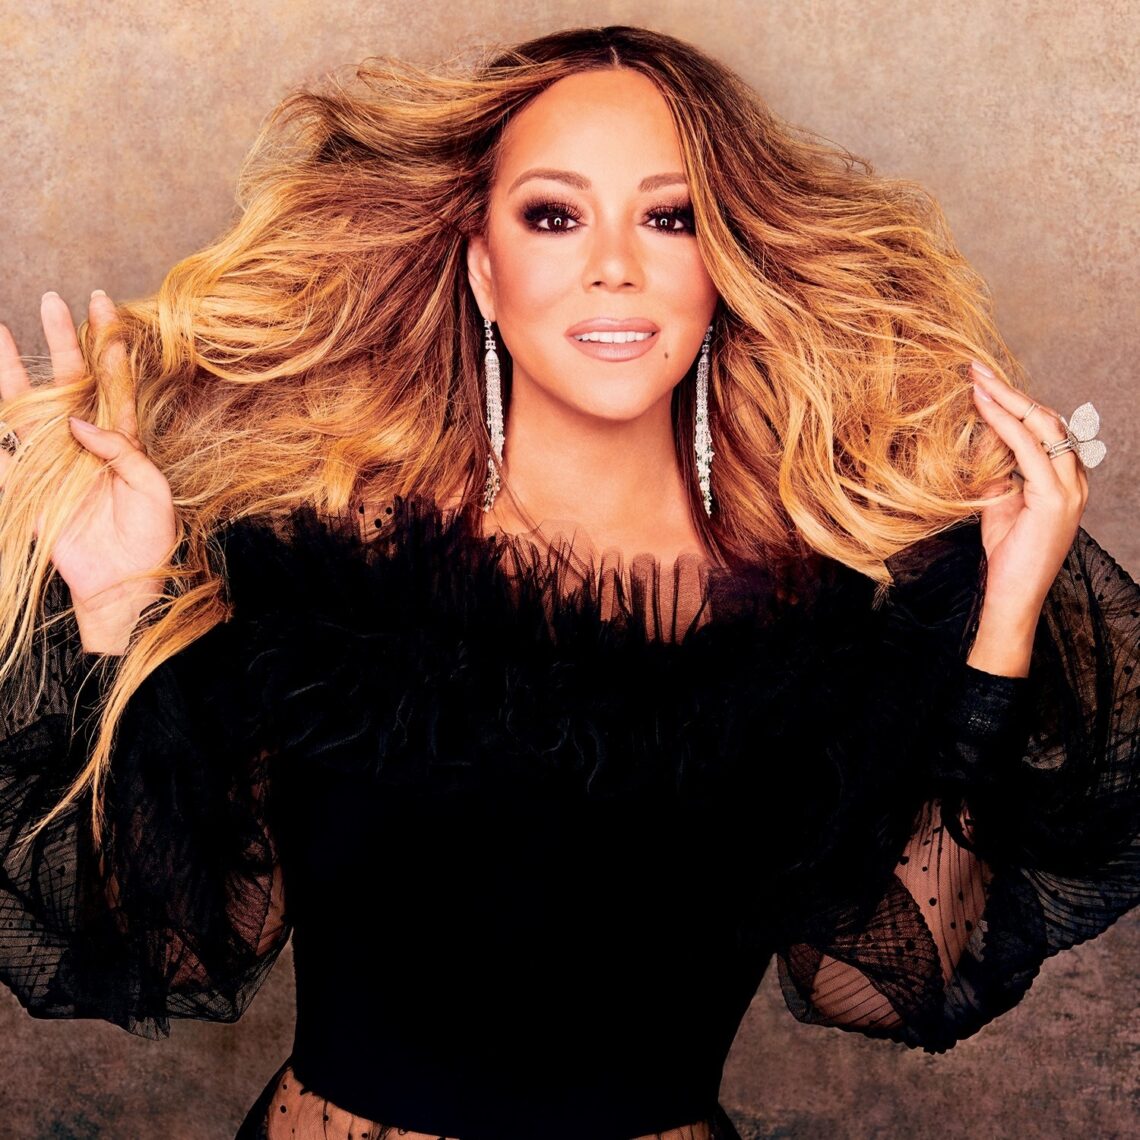 Mariah Carey Now Top RIAACertified Female Artist for Albums Rated R&B